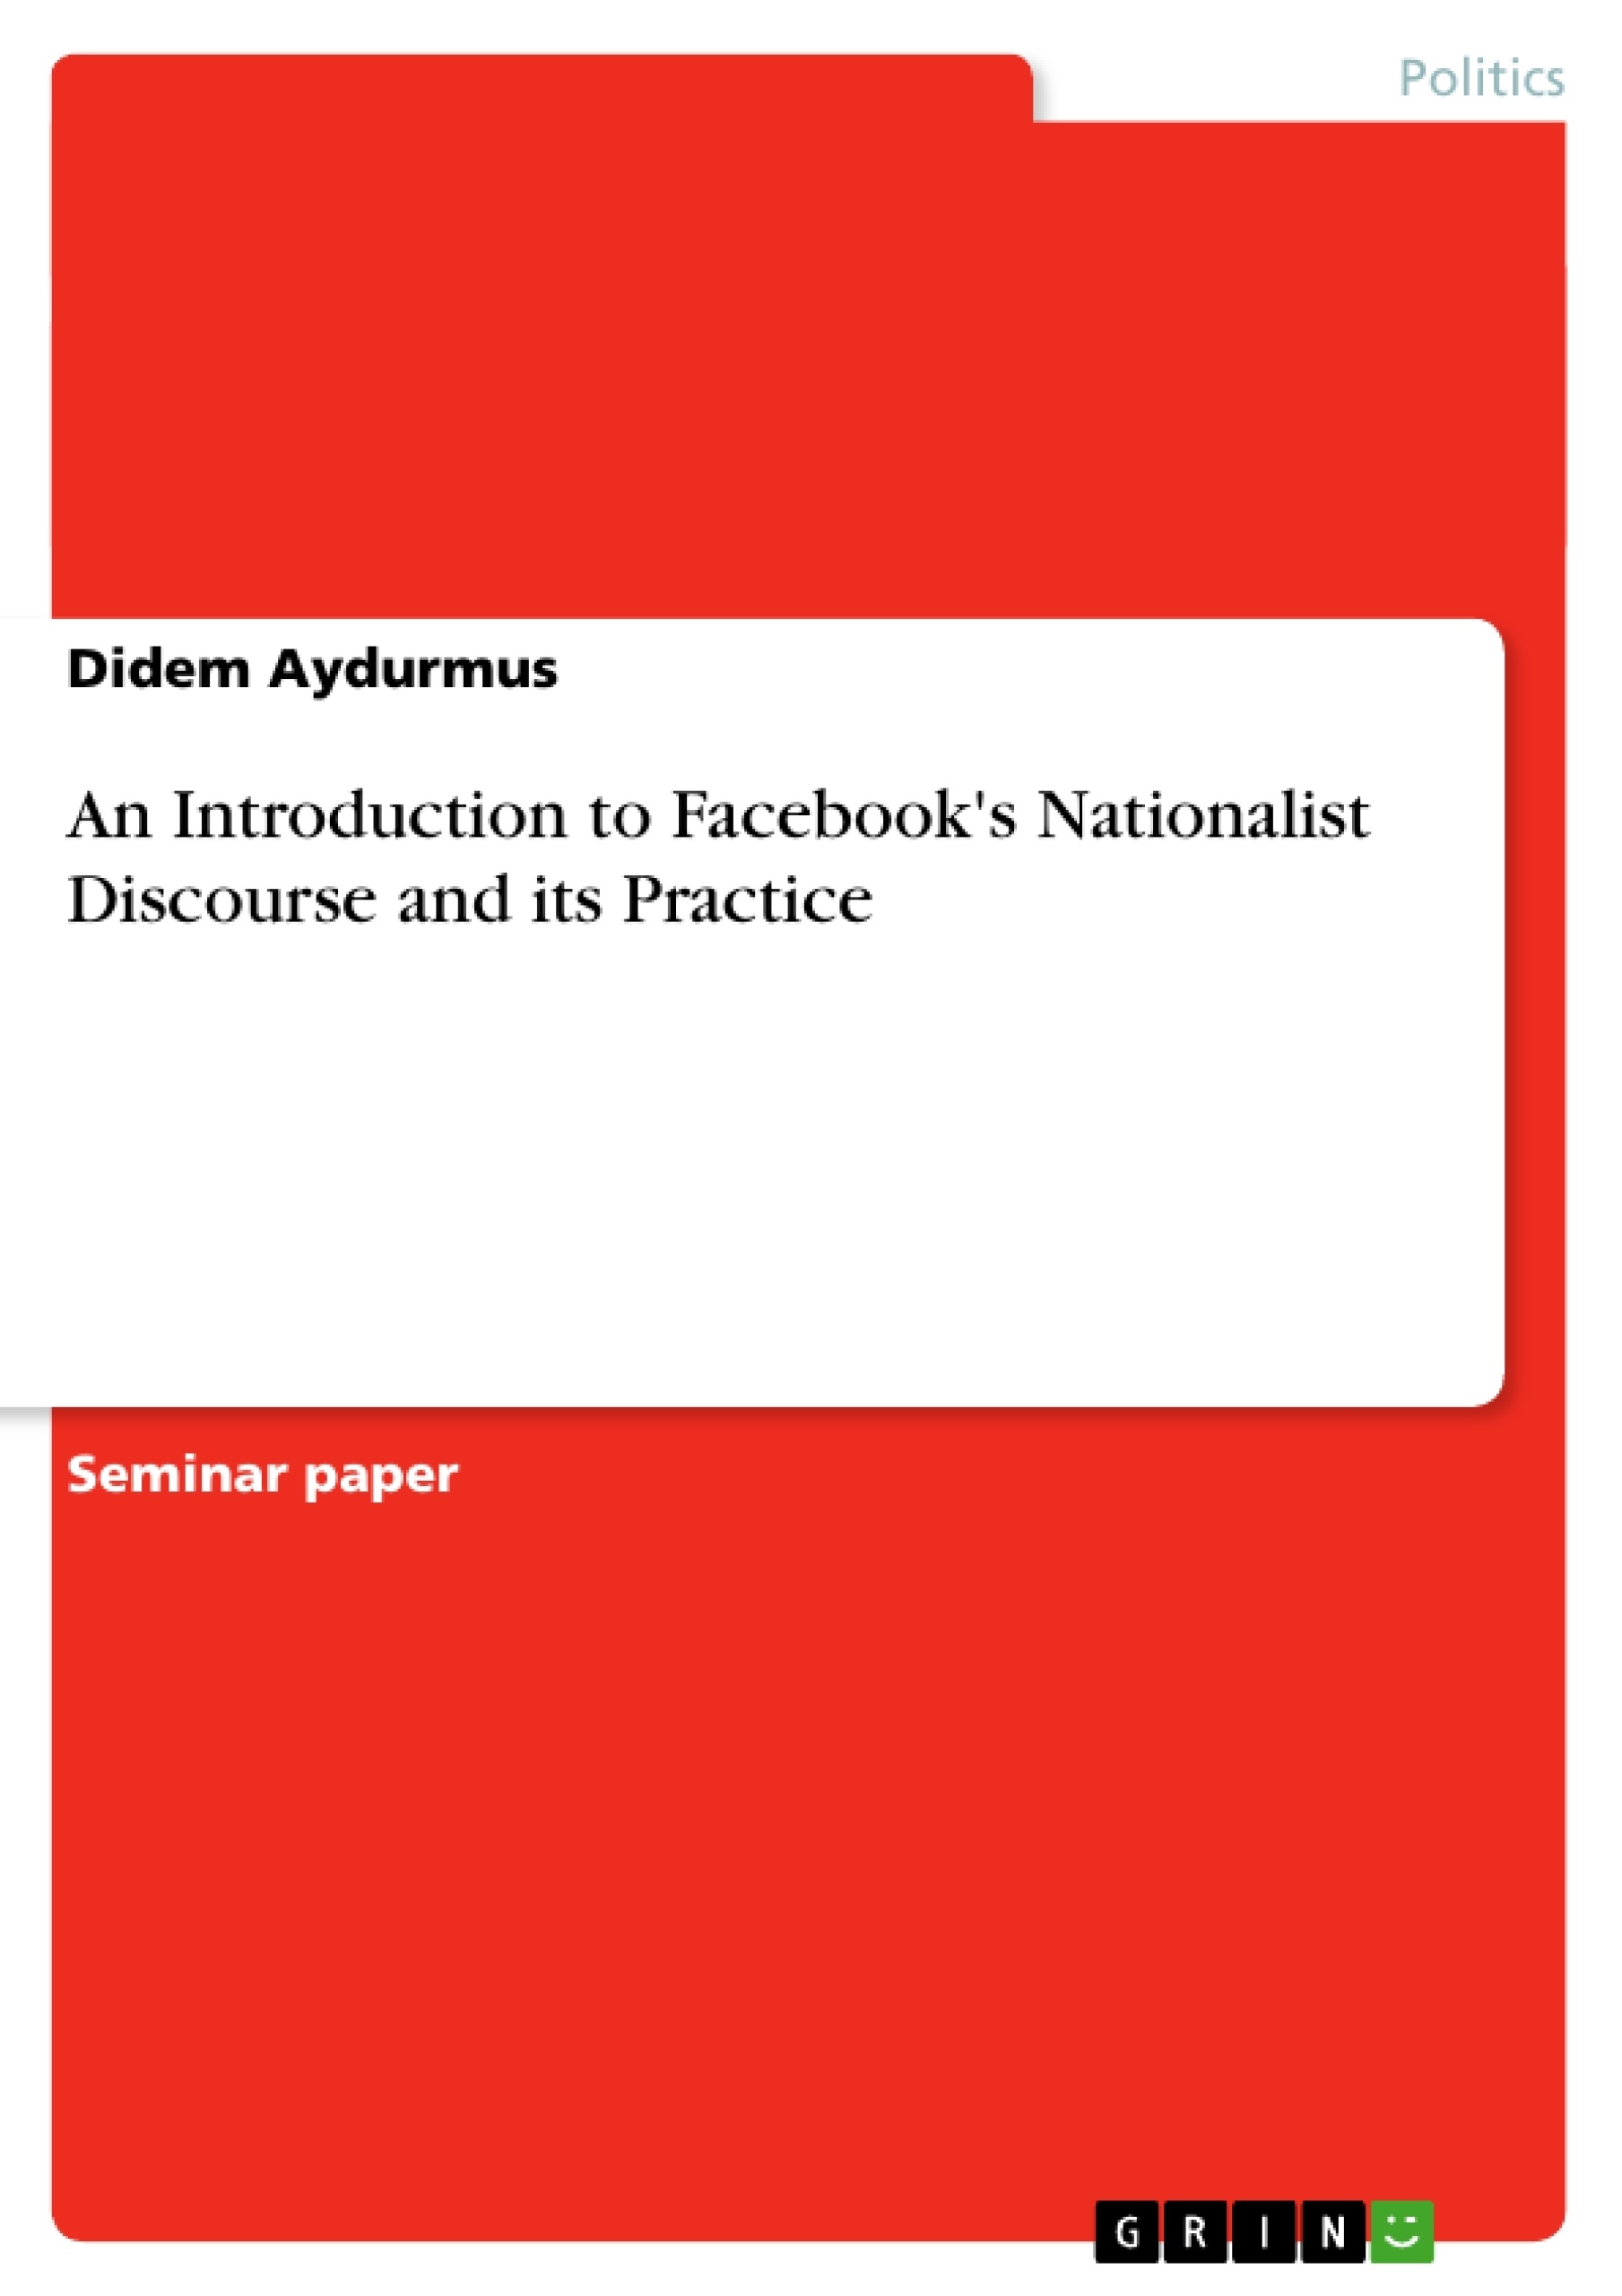 Título: An Introduction to Facebook's Nationalist Discourse and its Practice